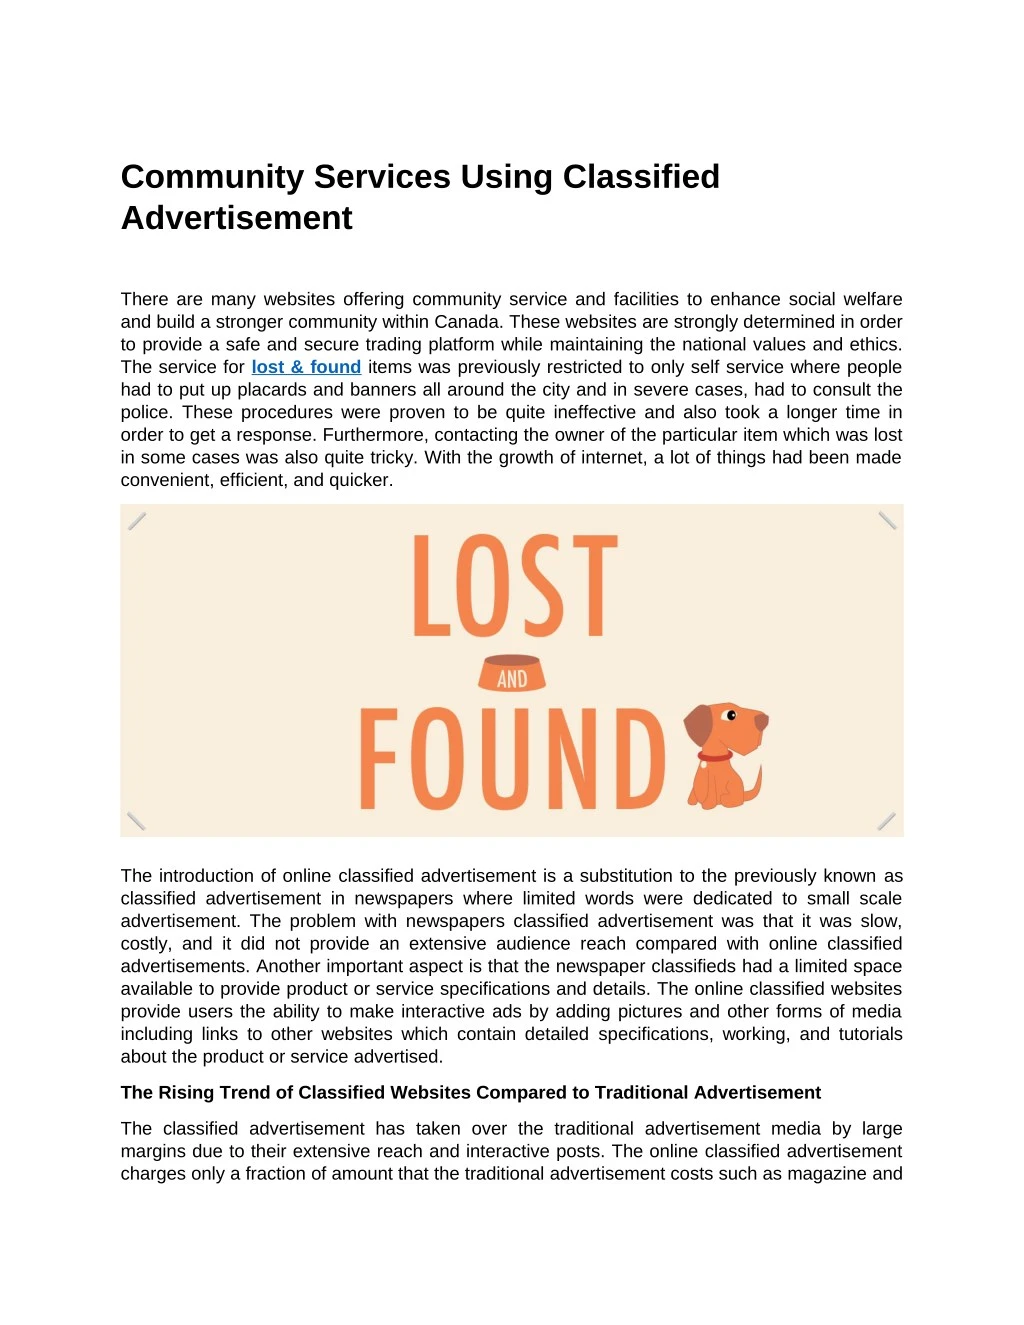 community services using classified advertisement